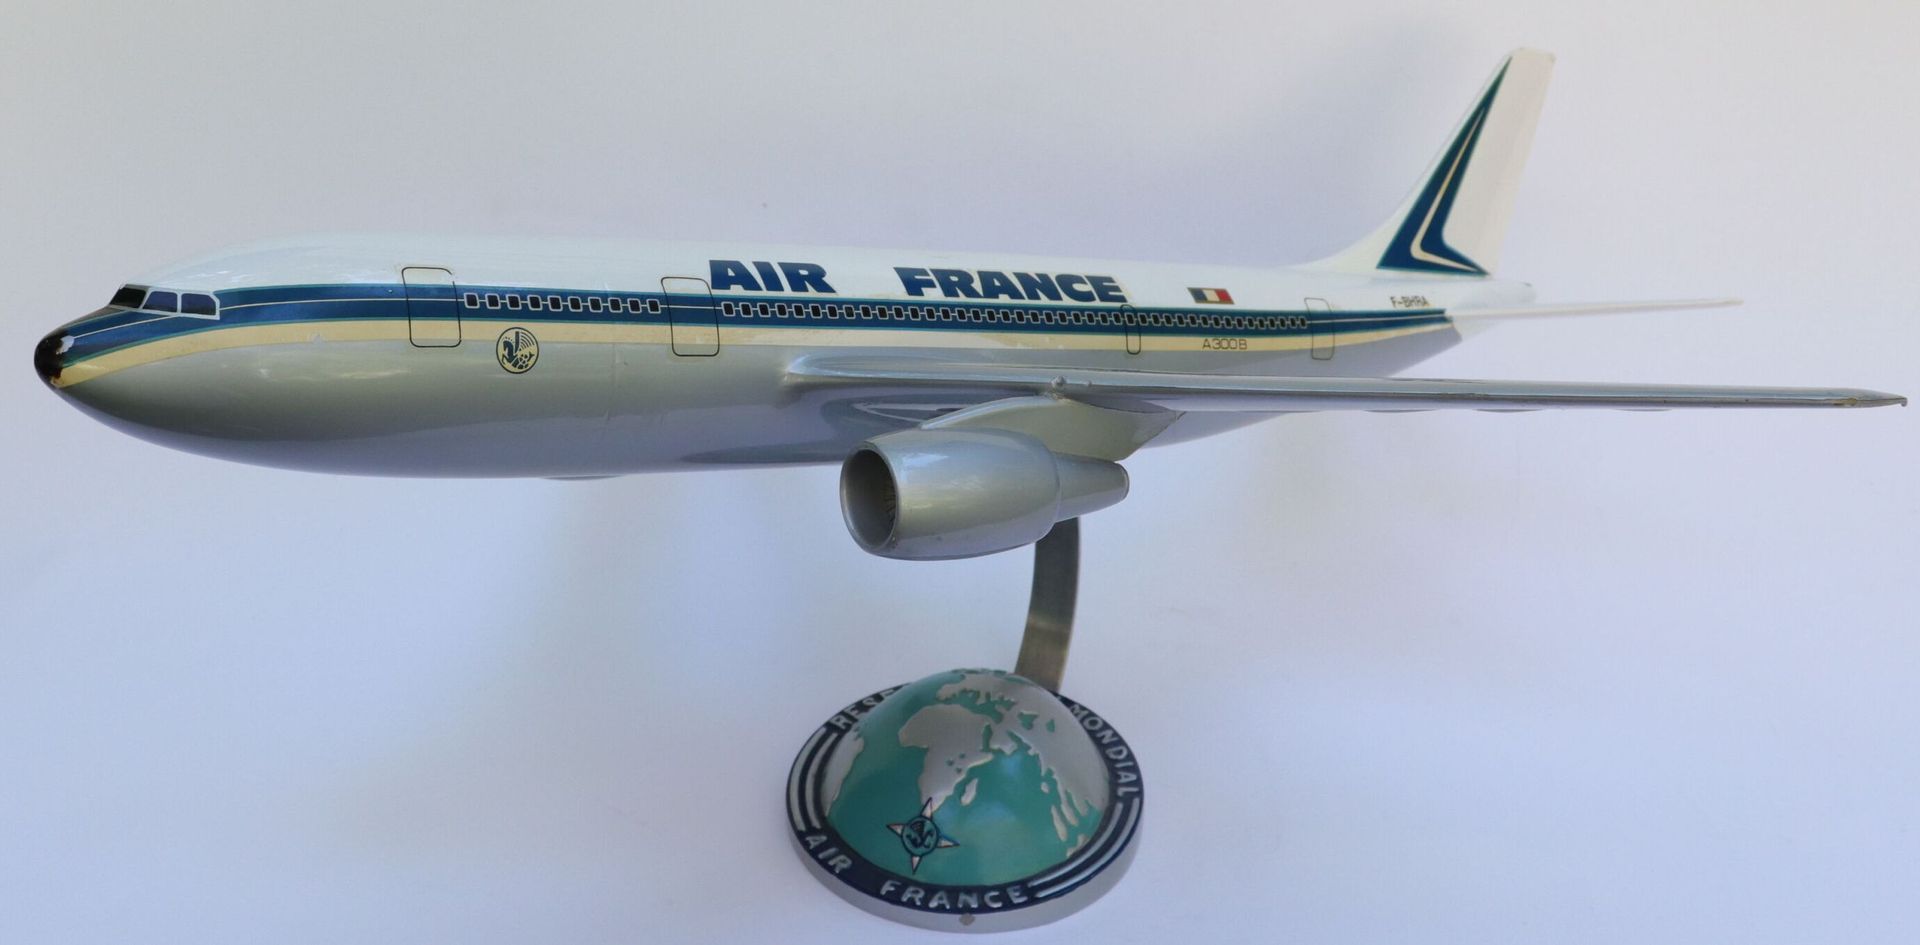 Null AIRBUS A300B AIR FRANCE.

Antique resin model decorated with the old compan&hellip;